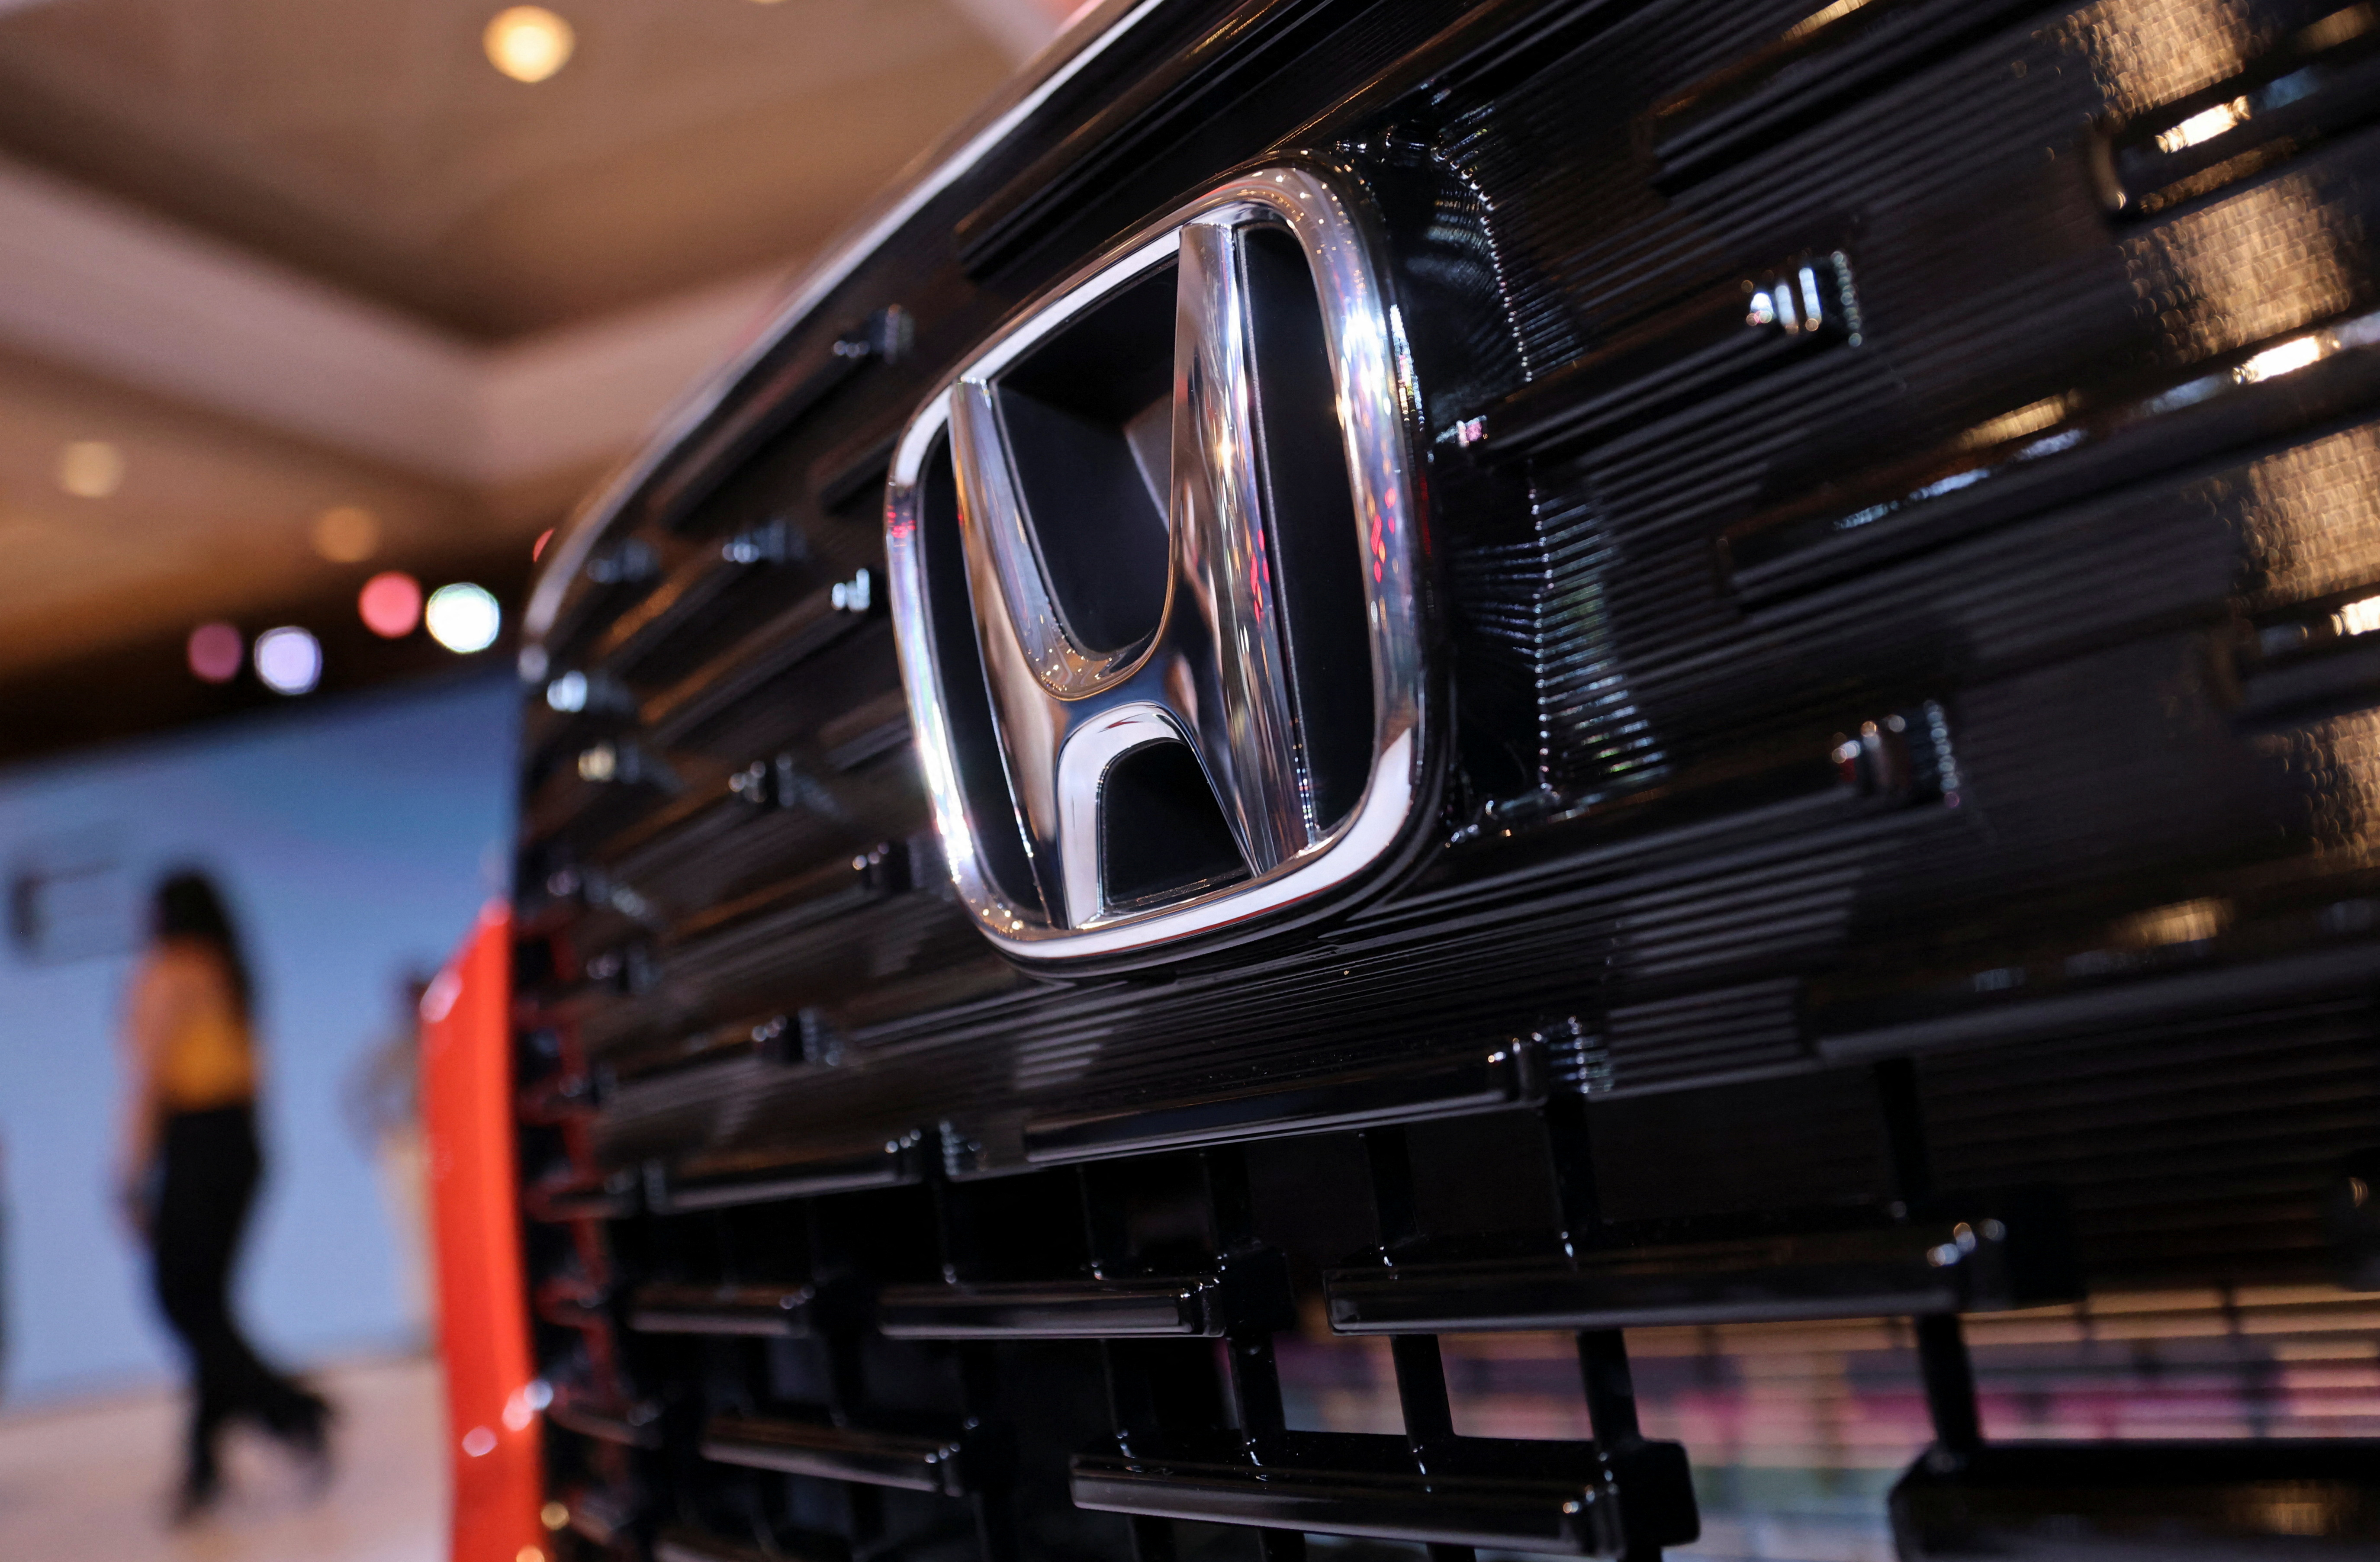 Honda's logo is seen on the front grill of the new SUV Elevate during its world premiere at an event in New Delhi